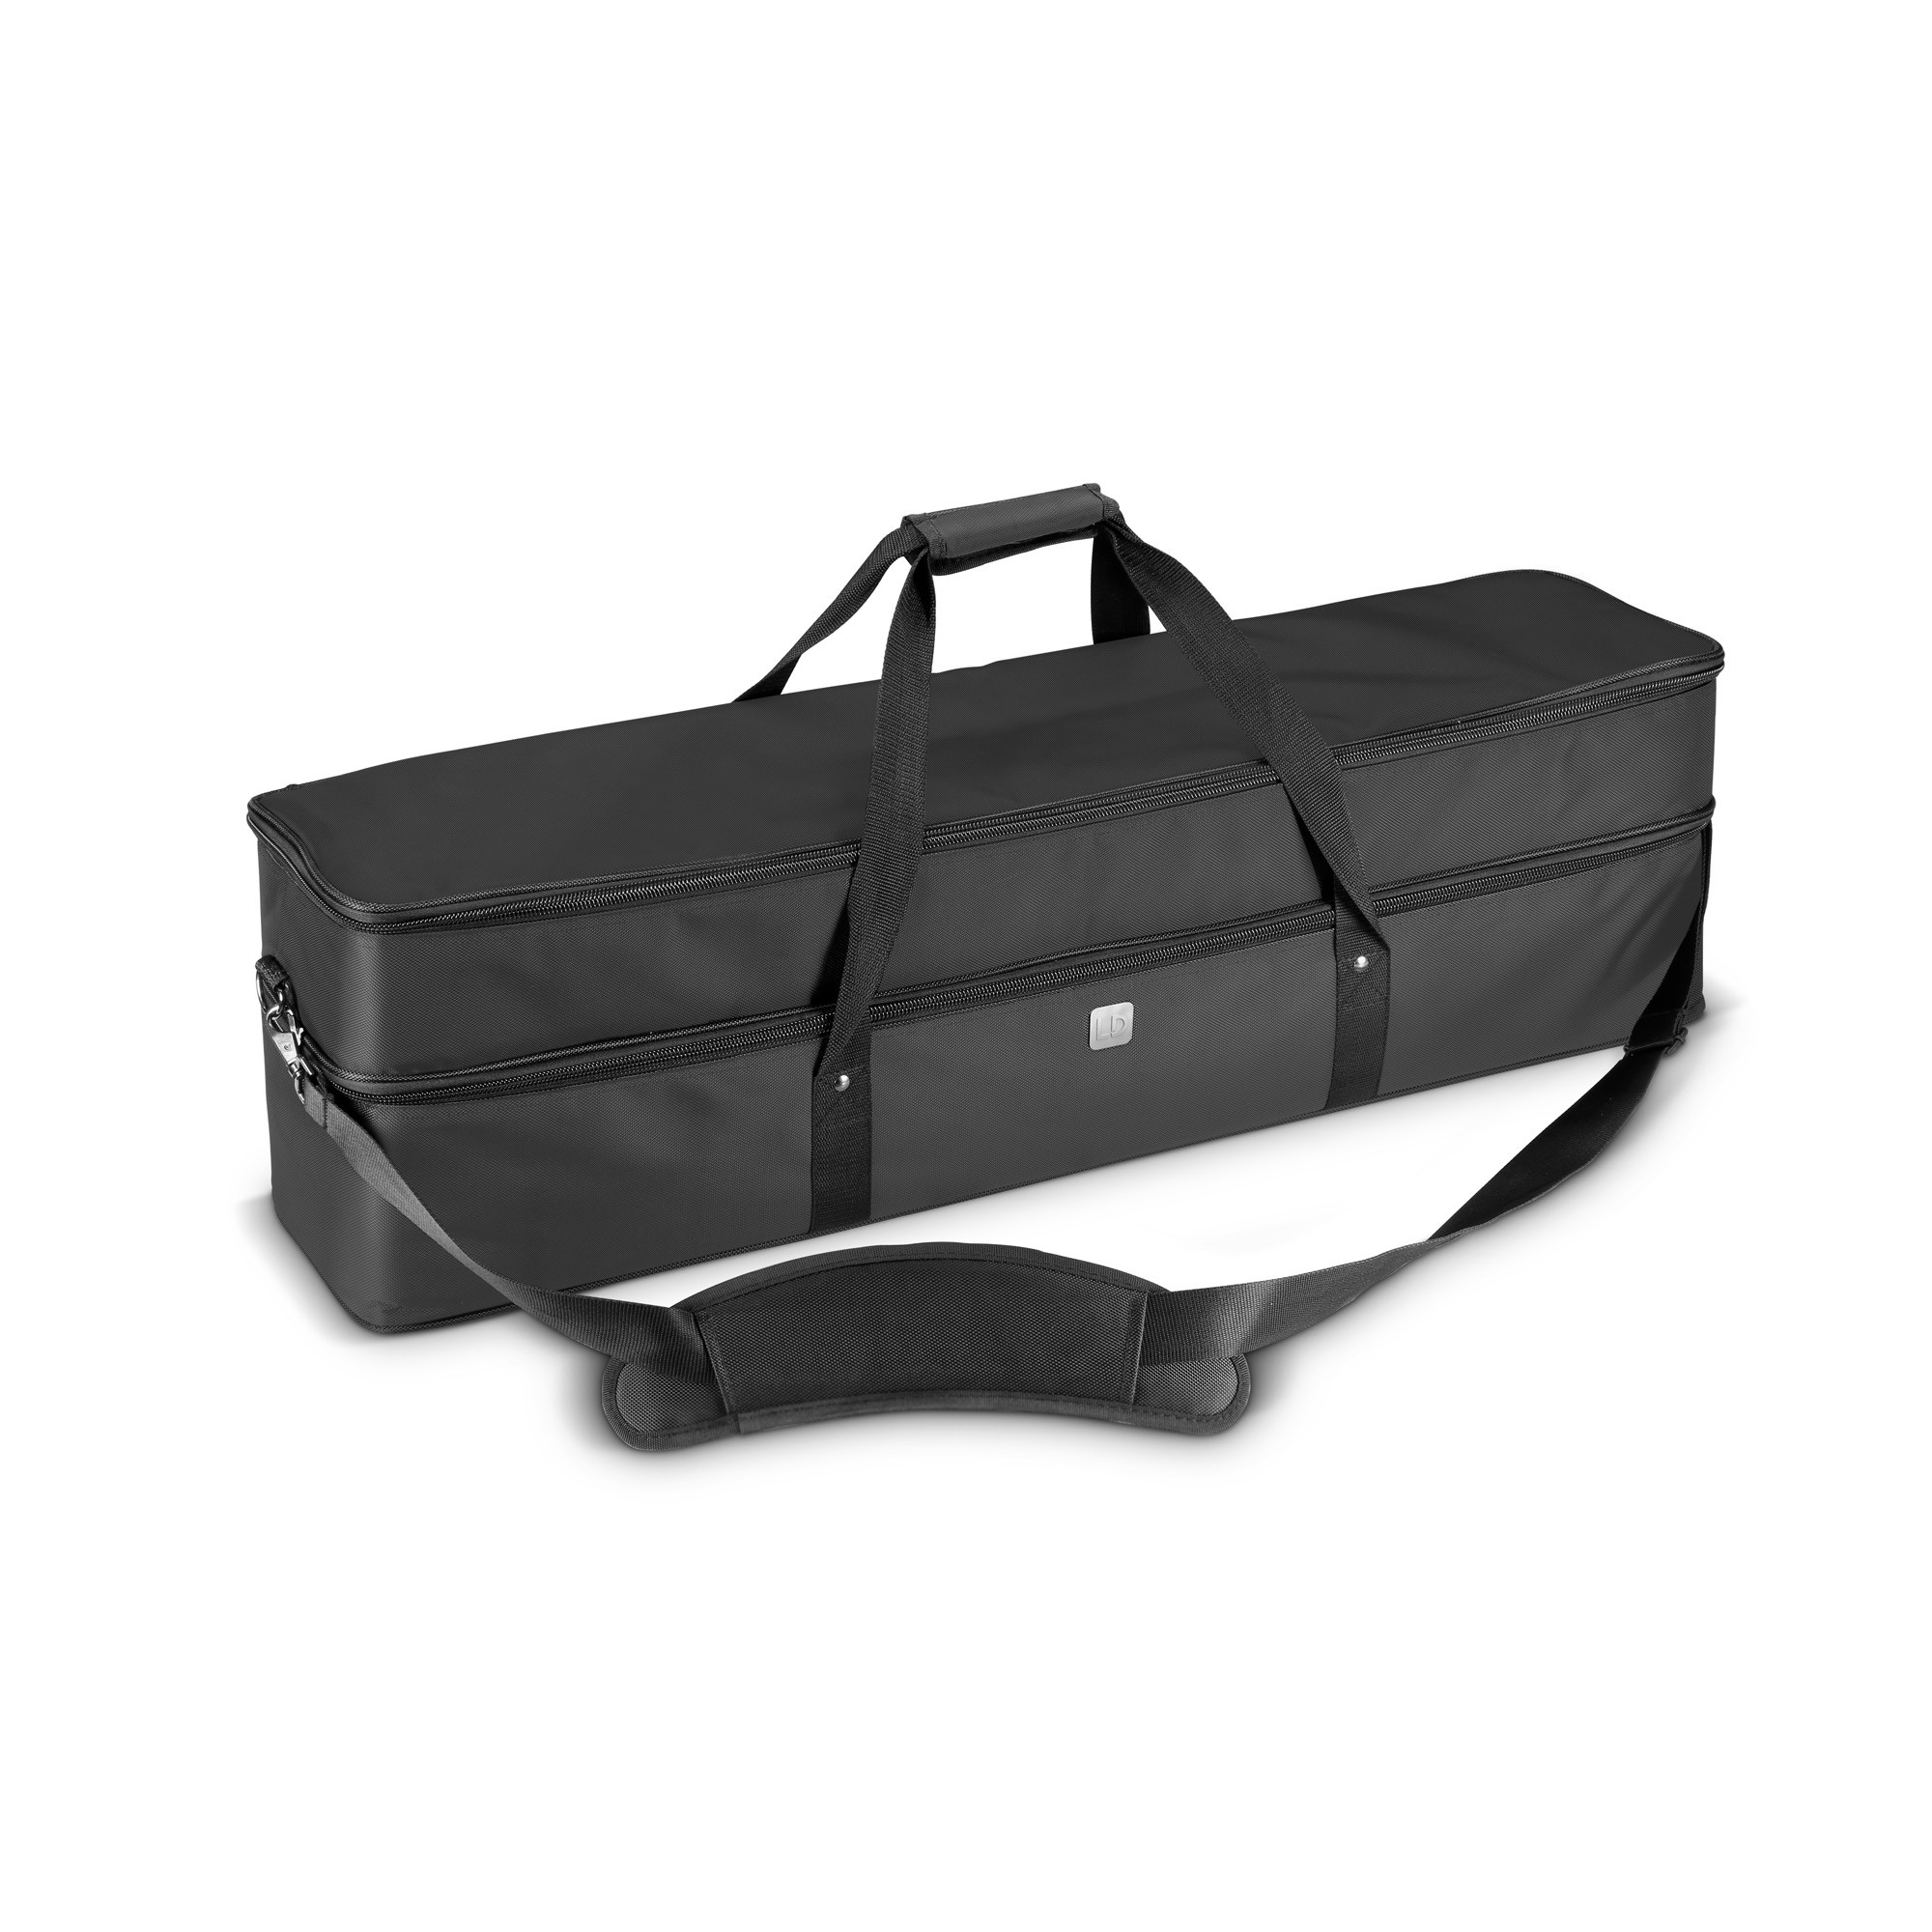 Ld Systems Curv 500 Ts Sat Bag - Luidsprekers & subwoofer hoes - Variation 7